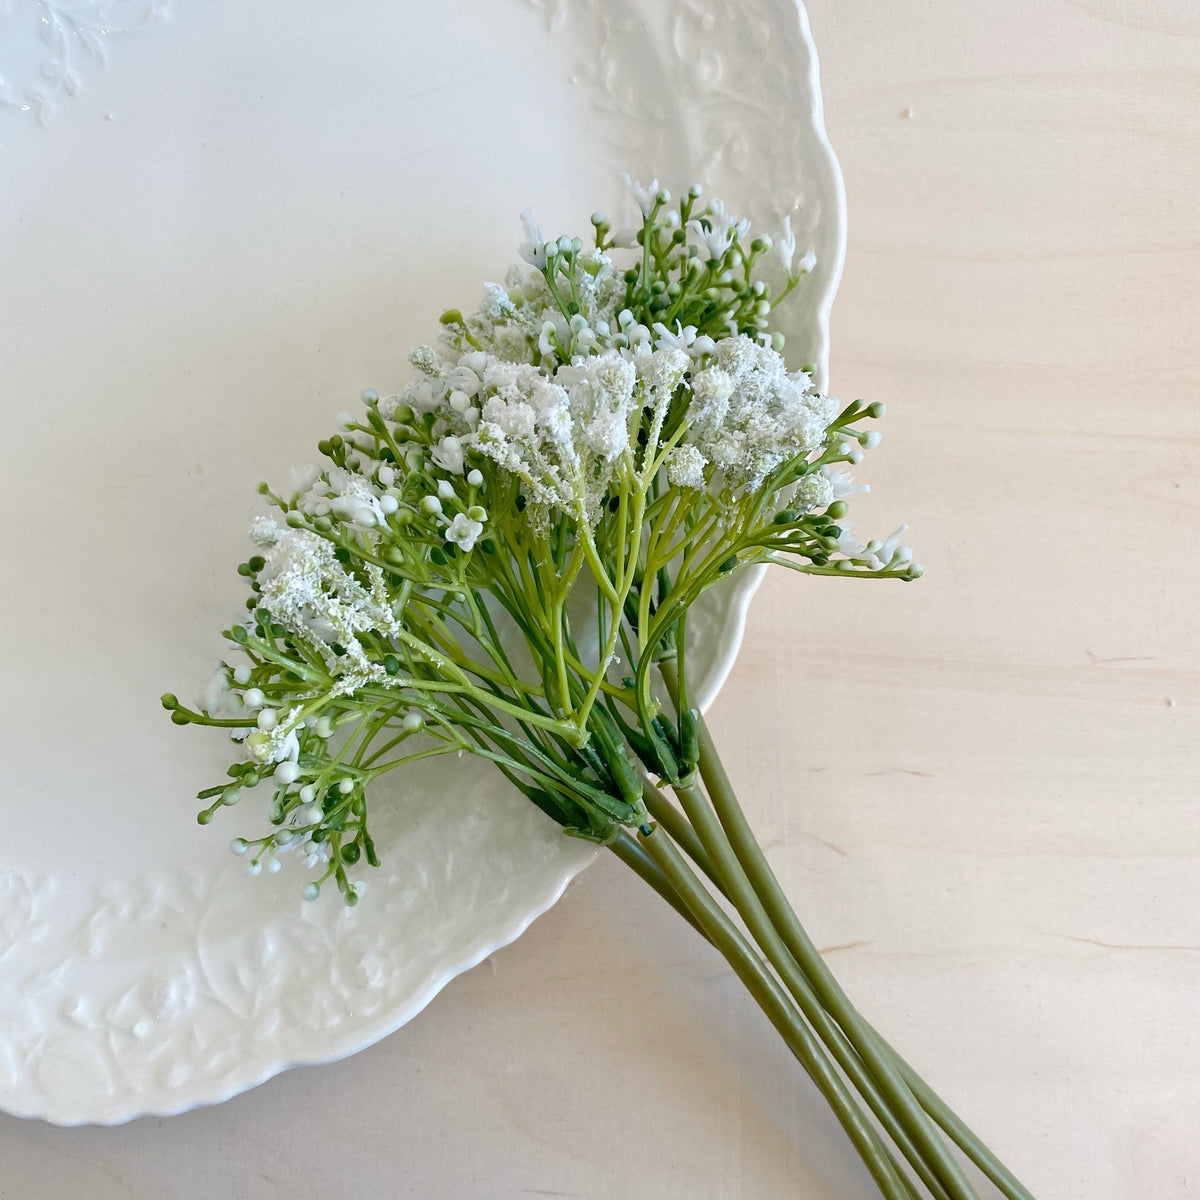 Gypsophila (Baby's Breath) - 15 inches - Oh! You're Lovely - Sola